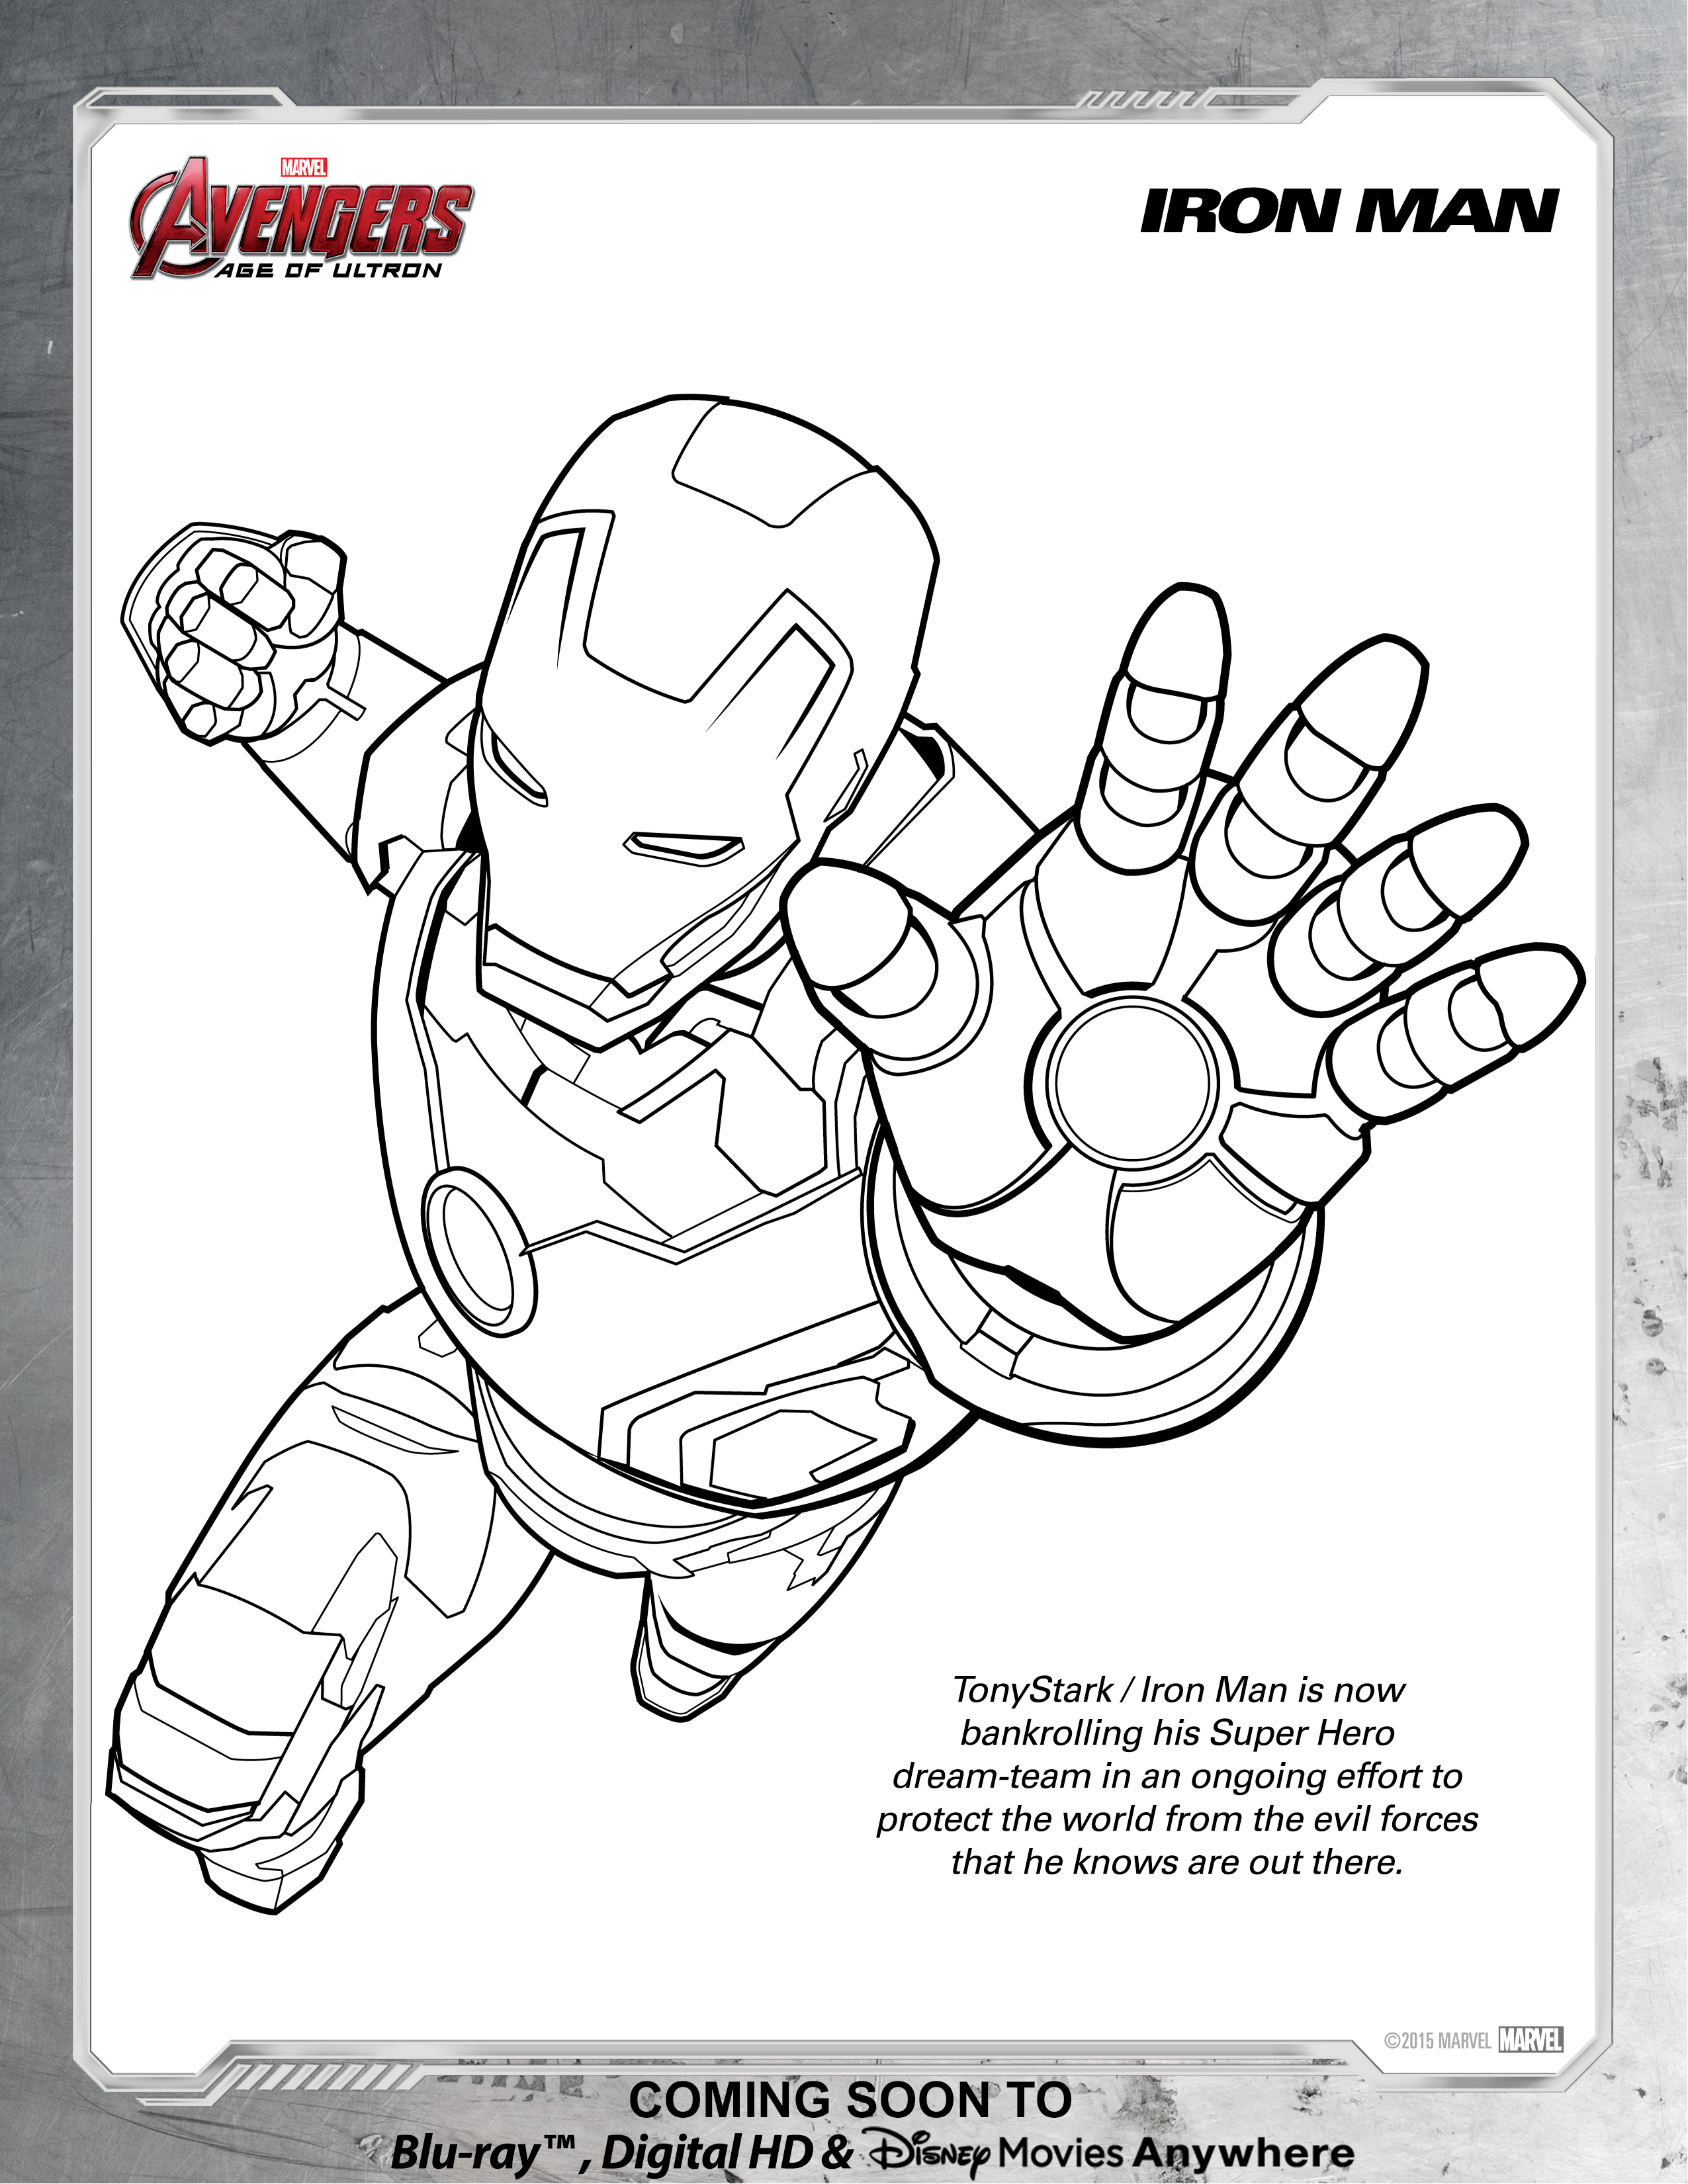 Iron Man Coloring Pages Online Avengers Iron Man Coloring Page Disney Movies